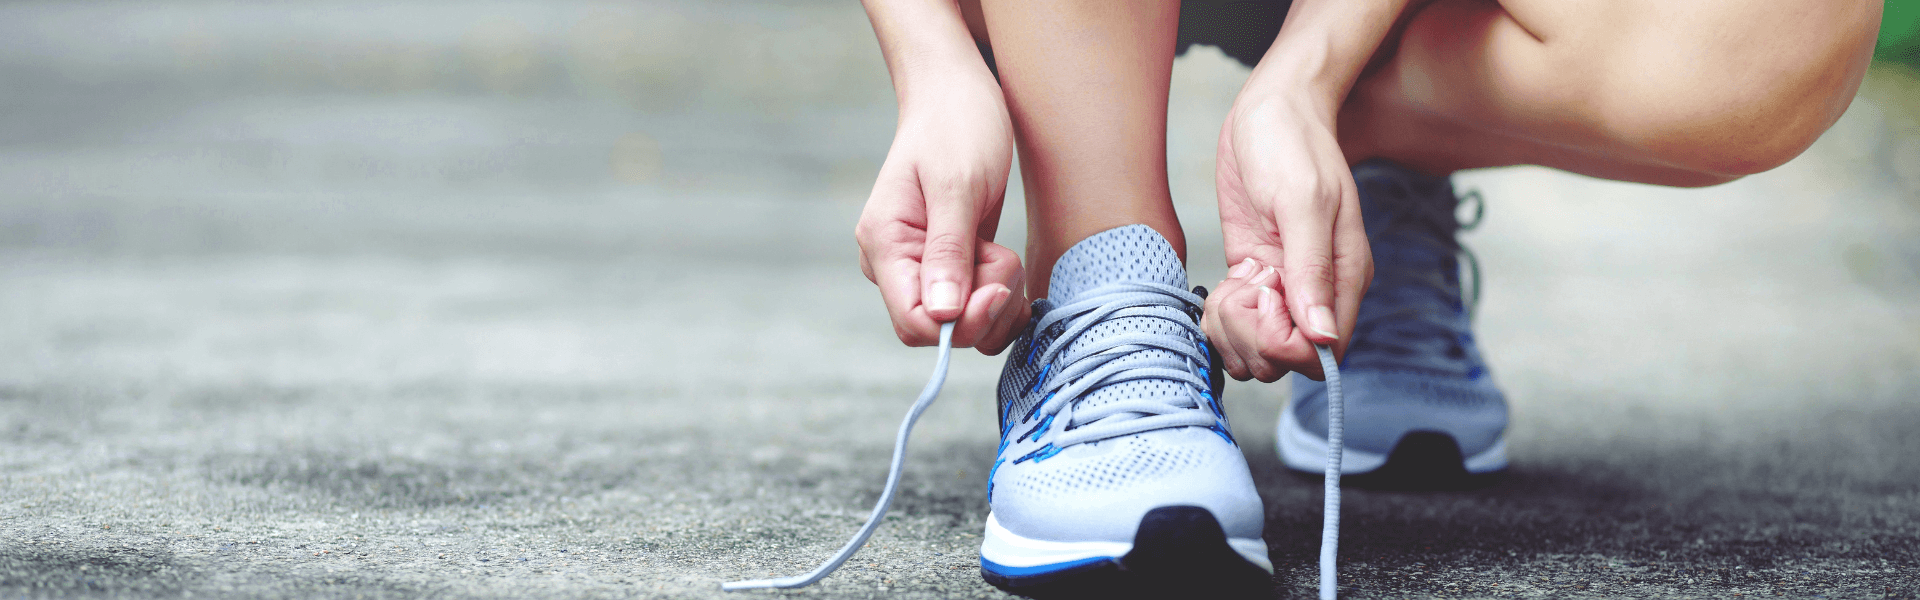 A young woman ties up her shoes before her morning run